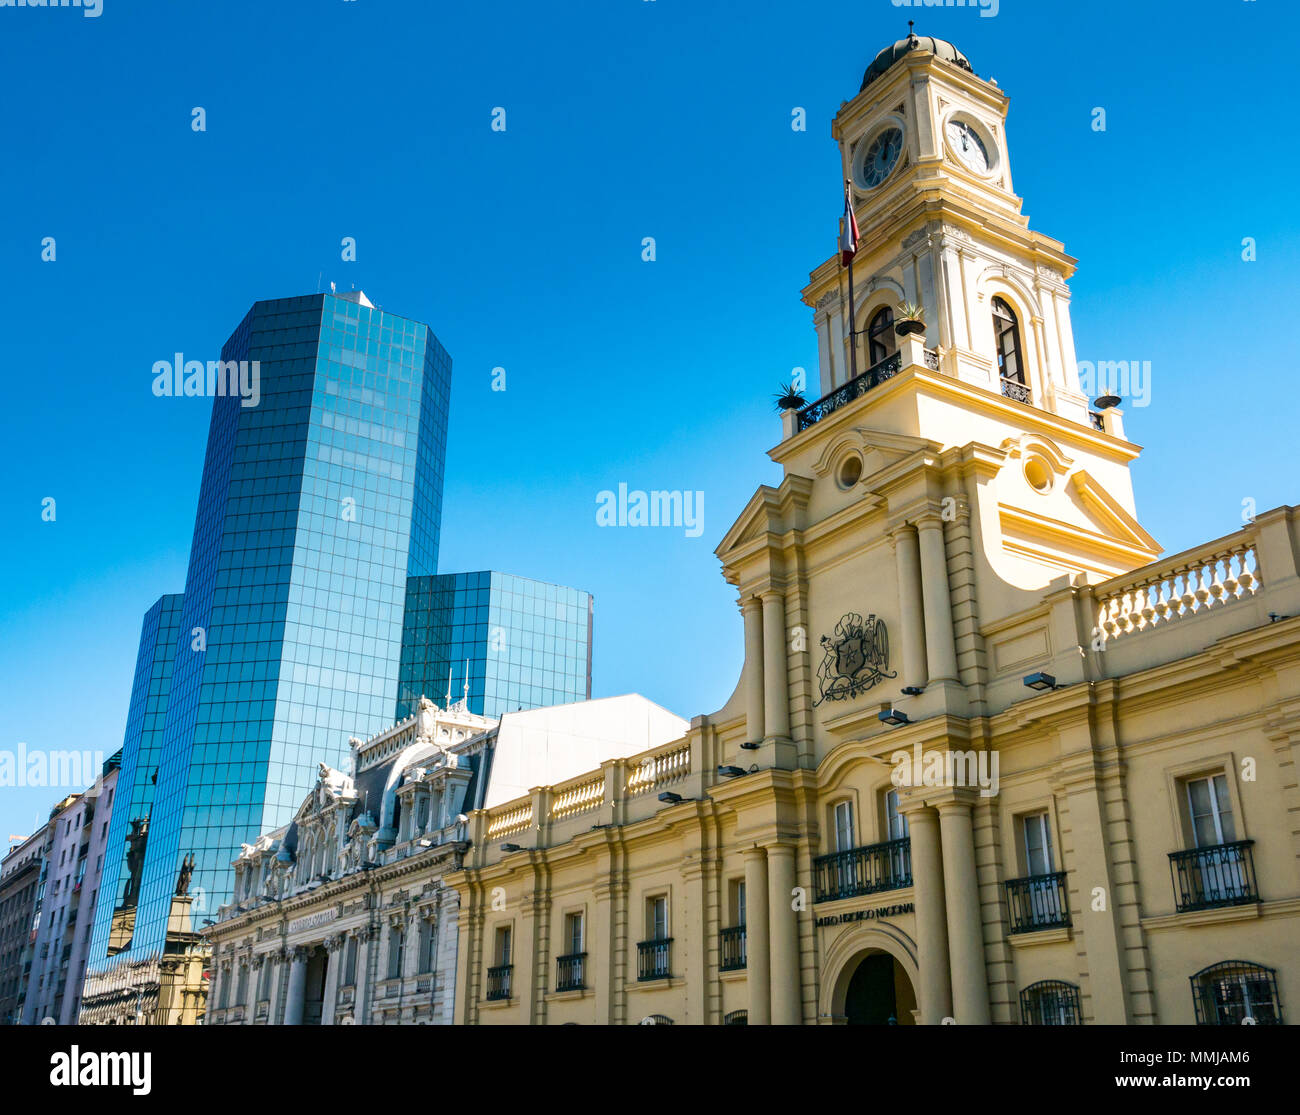 Historic National History Museum and Post Office buildings with modern glass skyscraper, Plaza de Armas, Santiago, Chile, South America Stock Photo